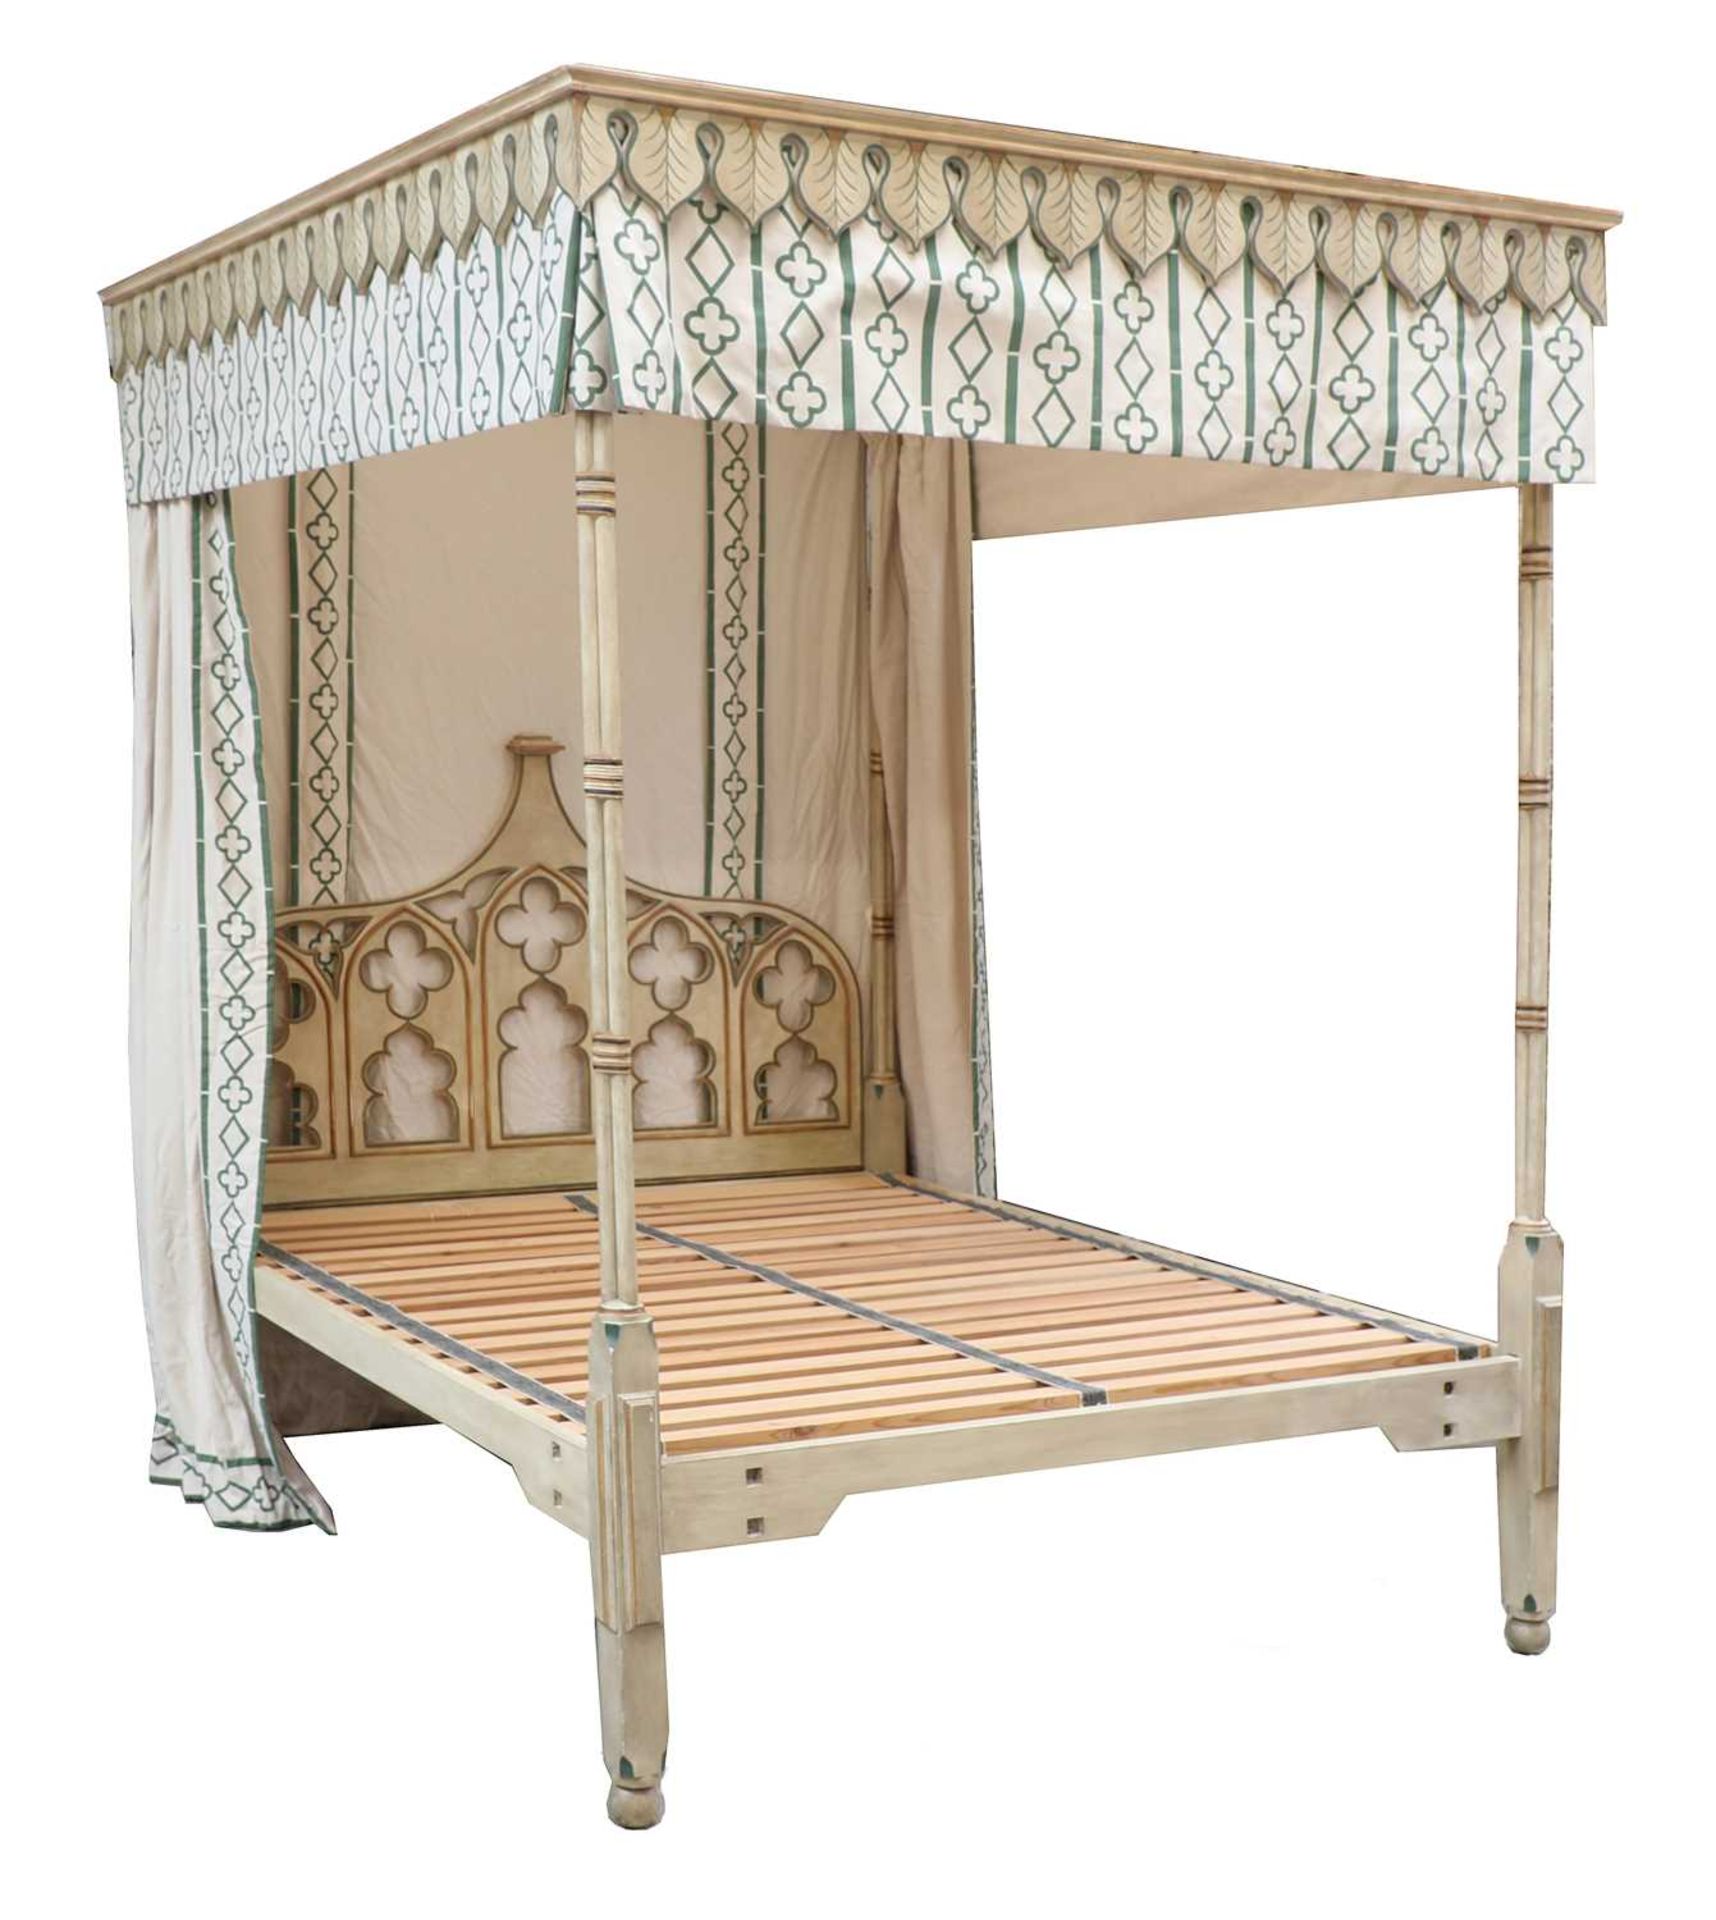 A Gothic Revival painted four-poster bed,